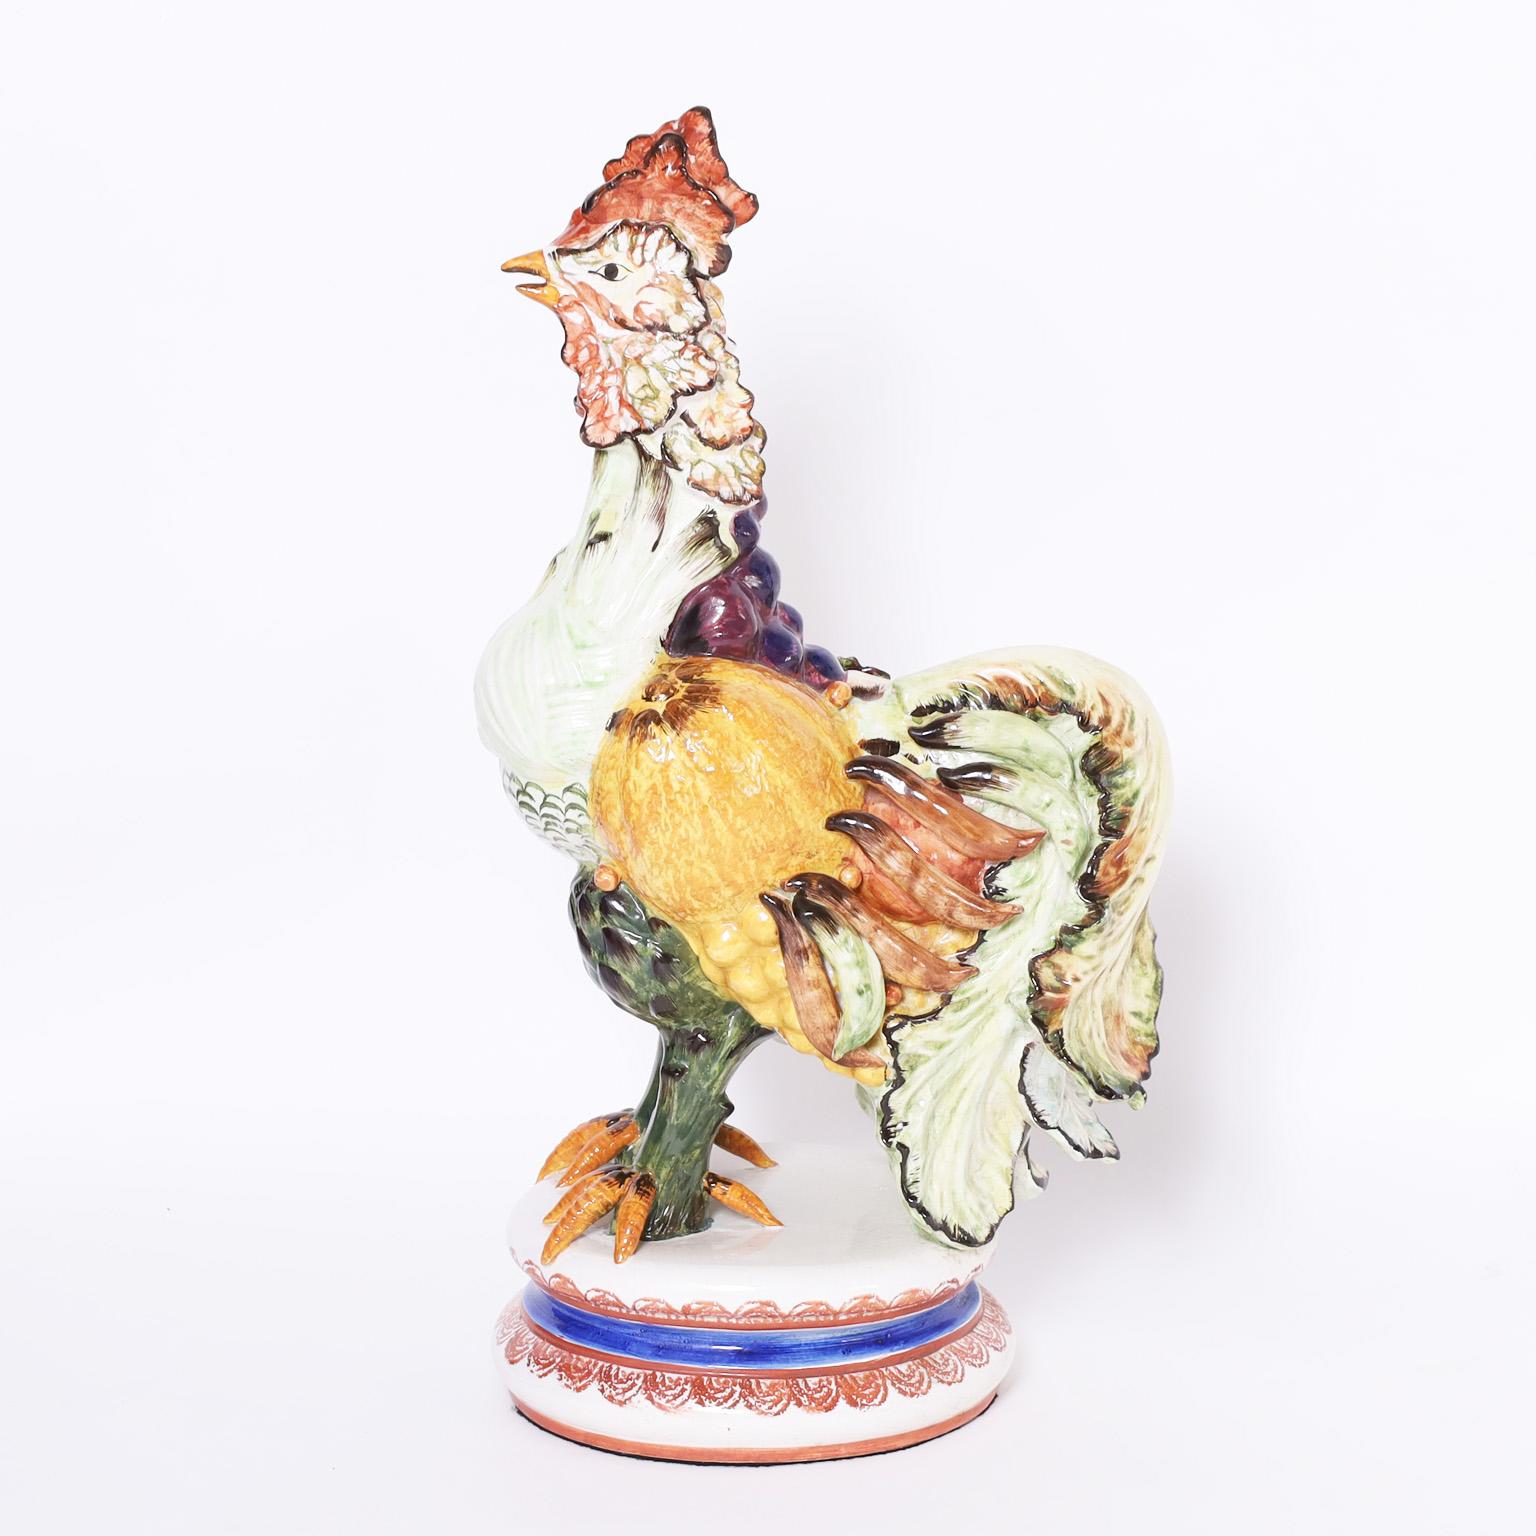 Large Whimsical mid-century Italian object of art crafted in porcelain depicting a rooster with vegetable body parts. Signed indistinctly on the bottom.